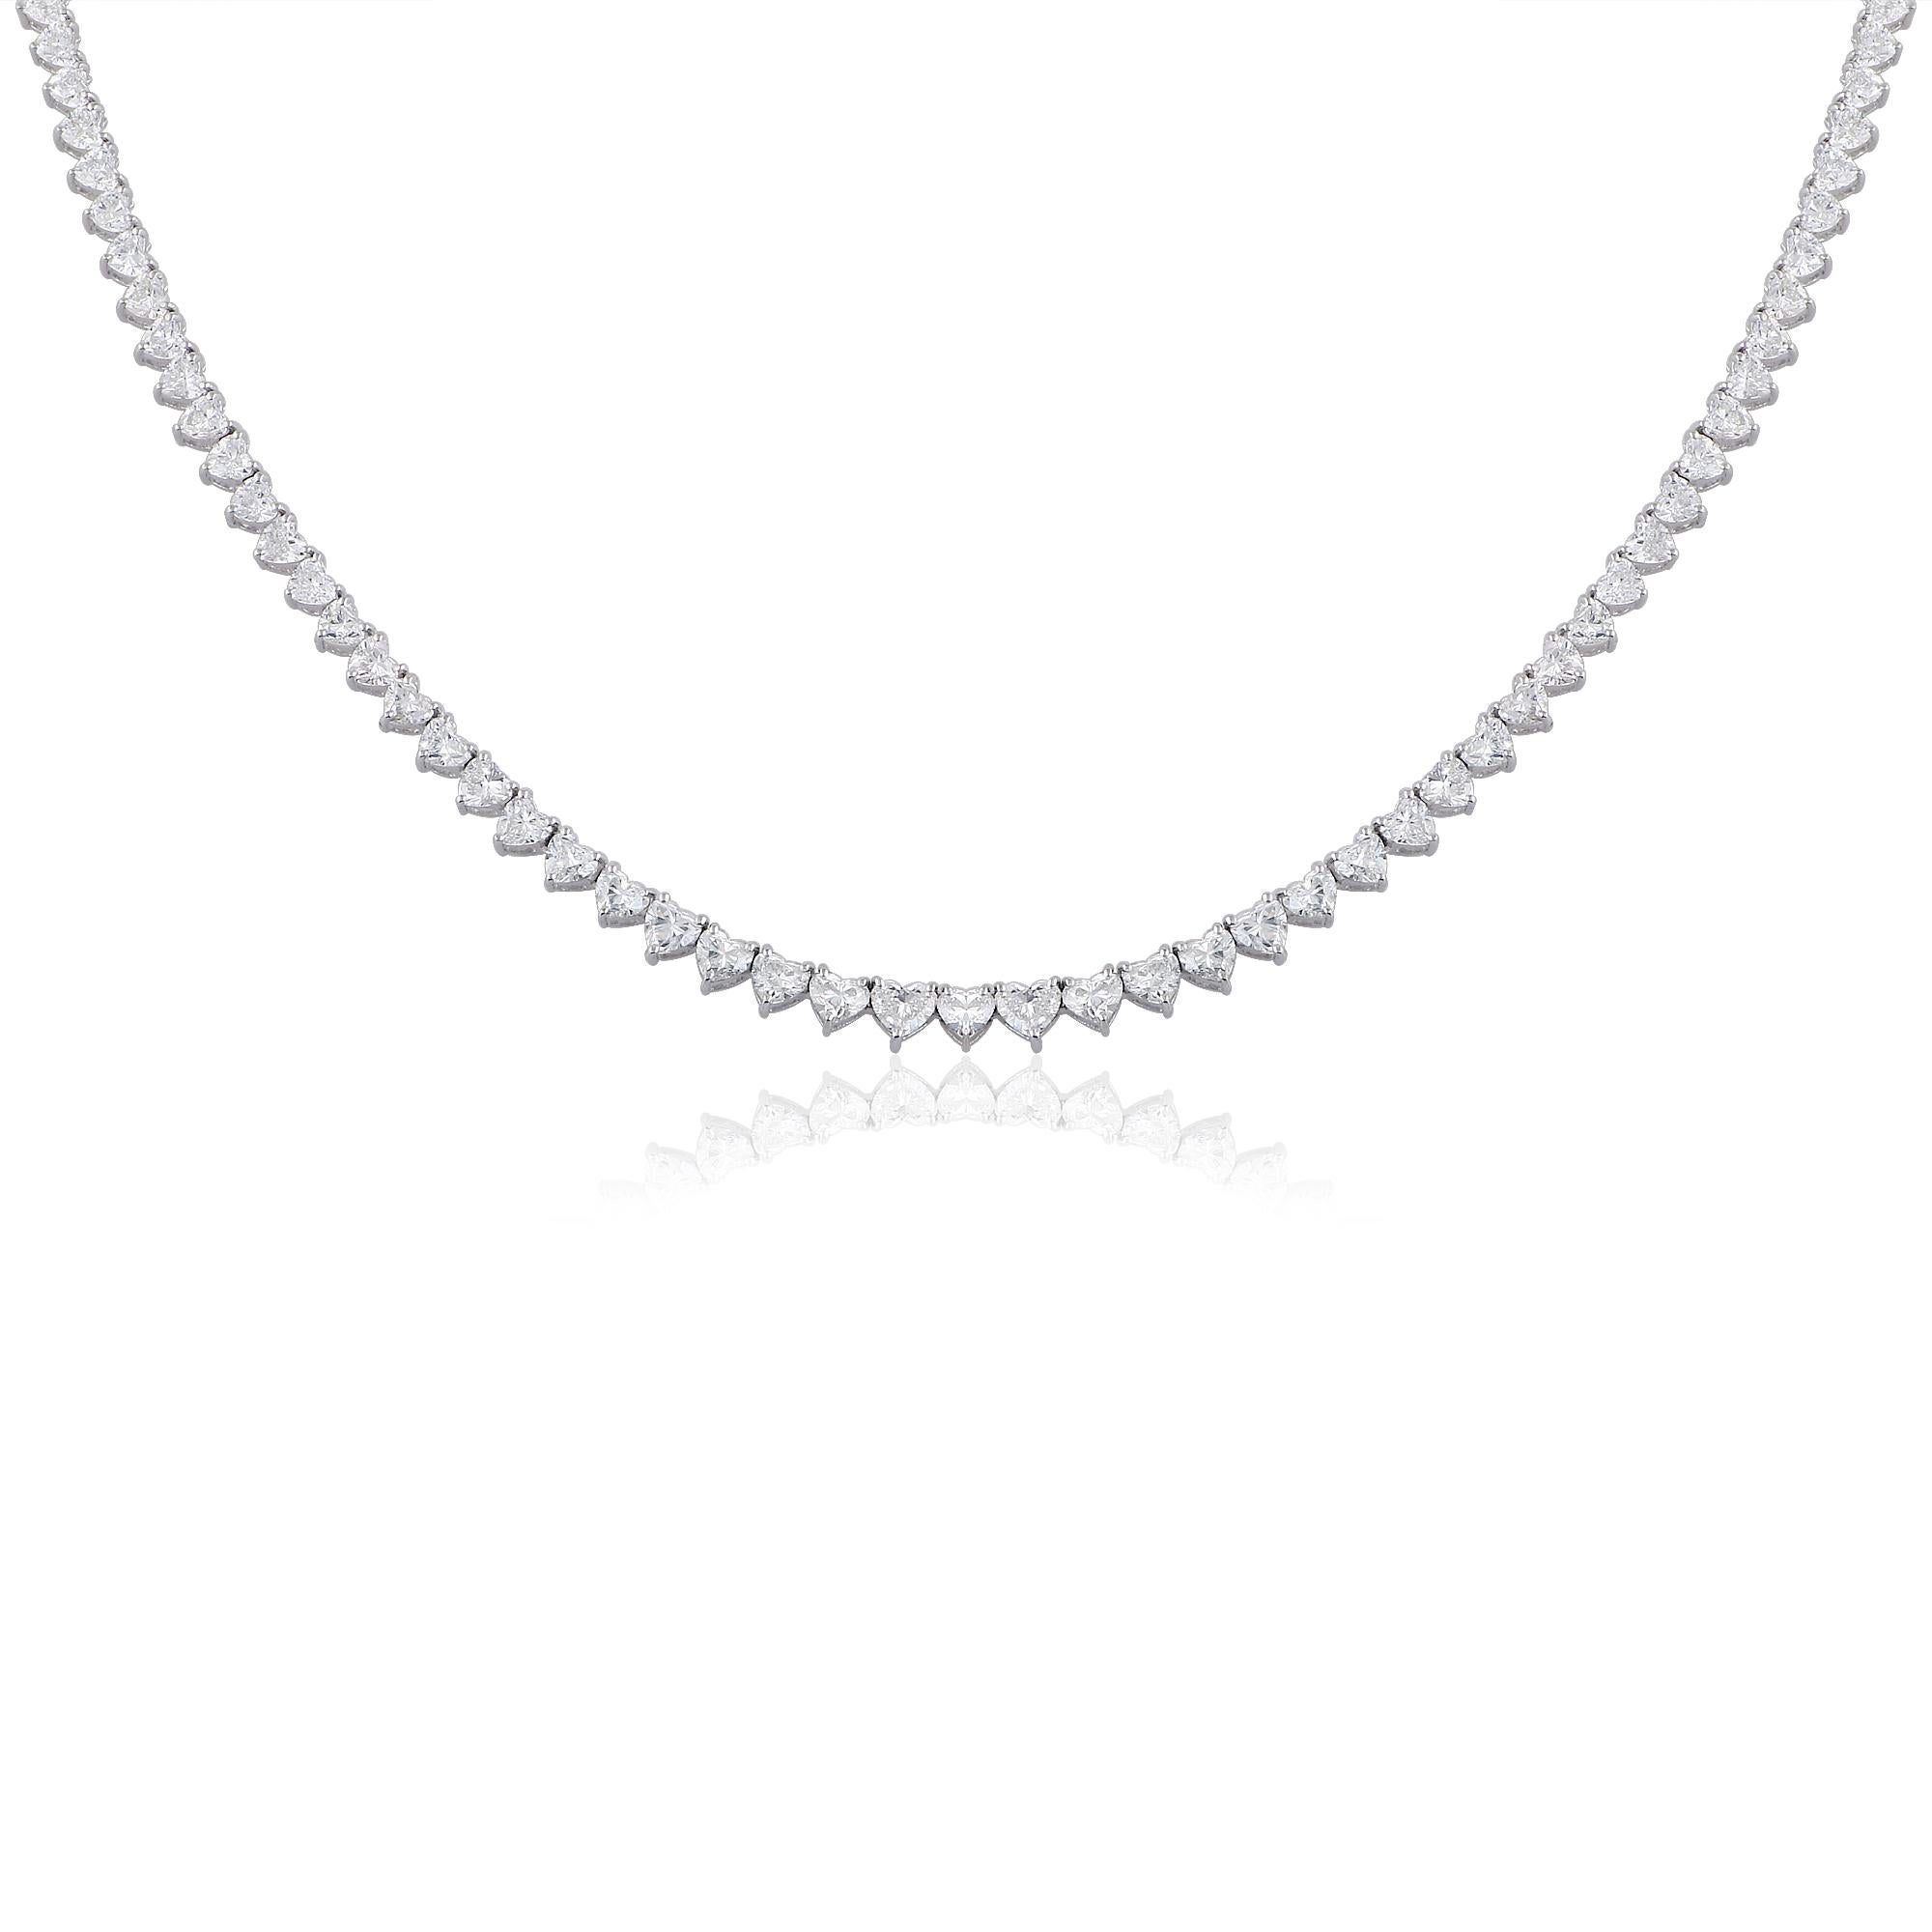 The centerpiece of this necklace is the exquisite heart-shaped diamond, weighing an impressive 9.50 carats. This diamond is meticulously cut and polished to maximize its brilliance and fire, creating a captivating display of light and sparkle. With